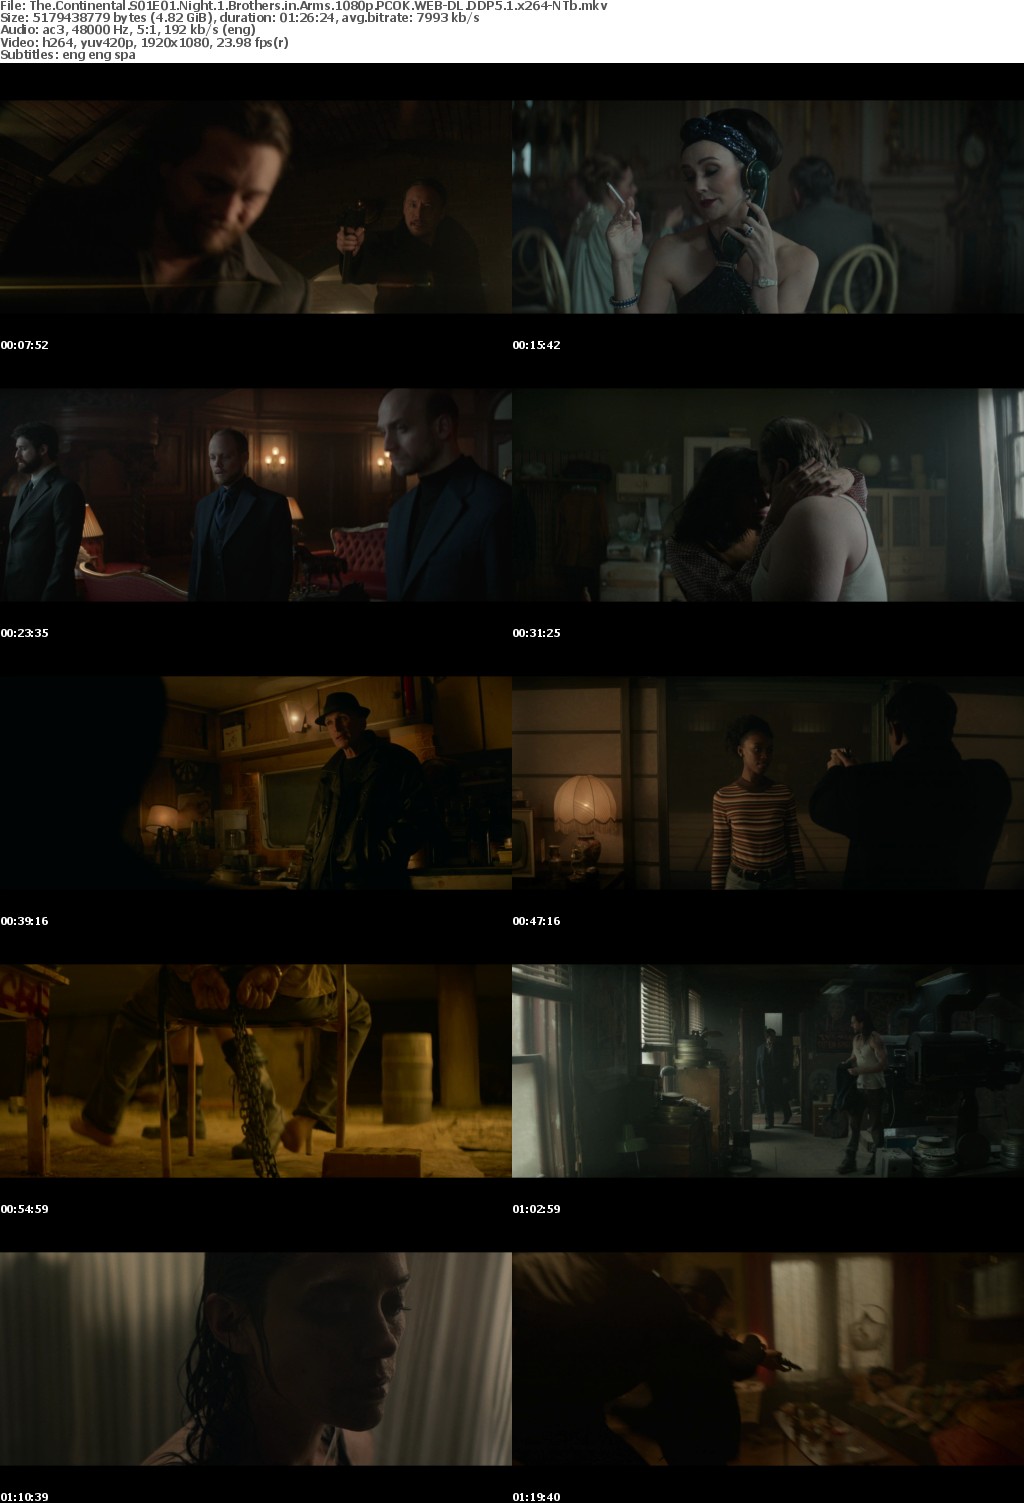 The Continental S01E01 Night 1 Brothers in Arms 1080p PCOK WEB-DL DDP5 1 x264-NTb